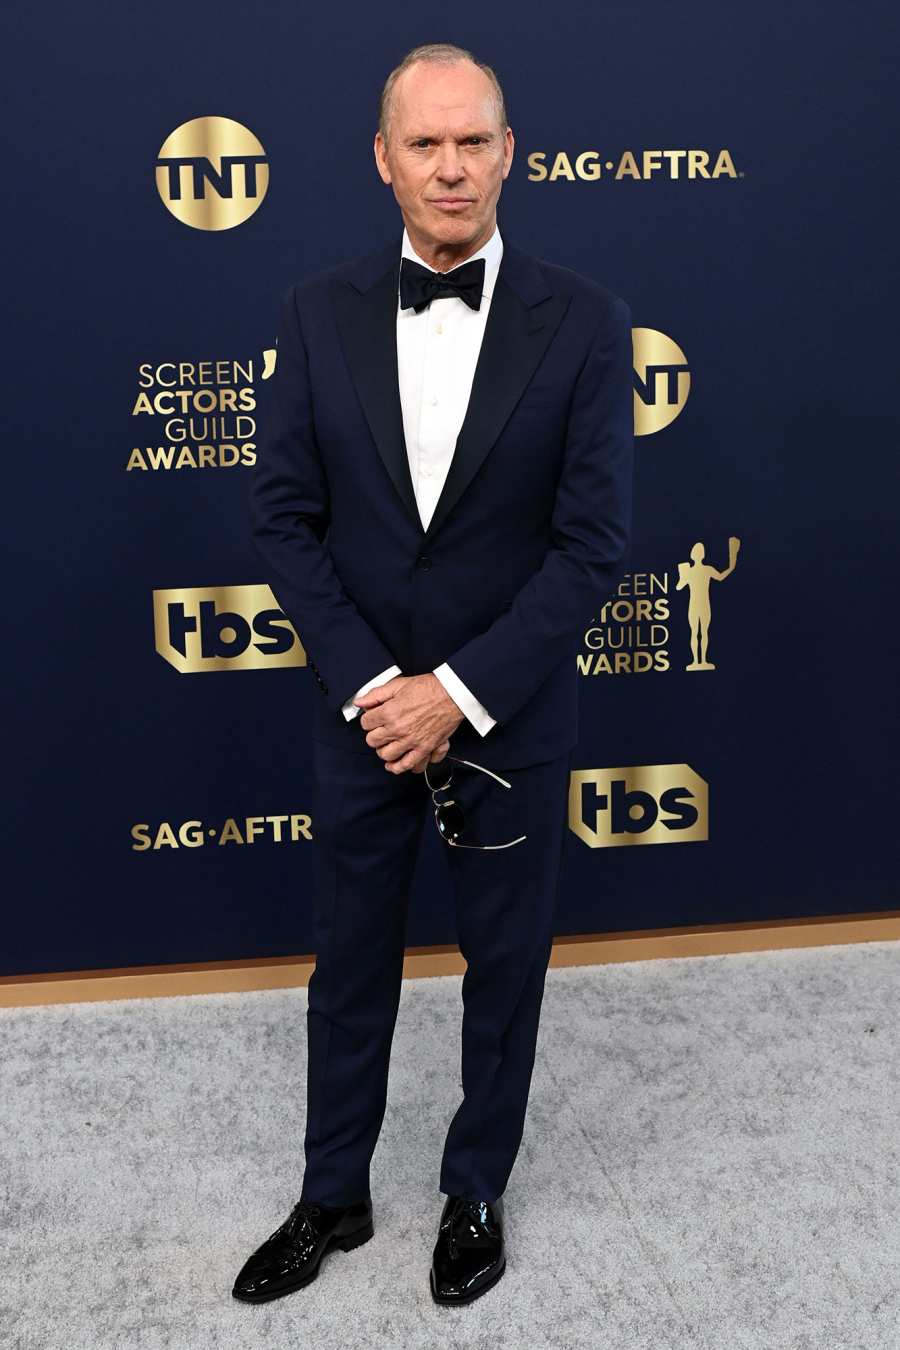 Michael Keaton The Best Dressed Hottest Men at the 2022 SAG Awards